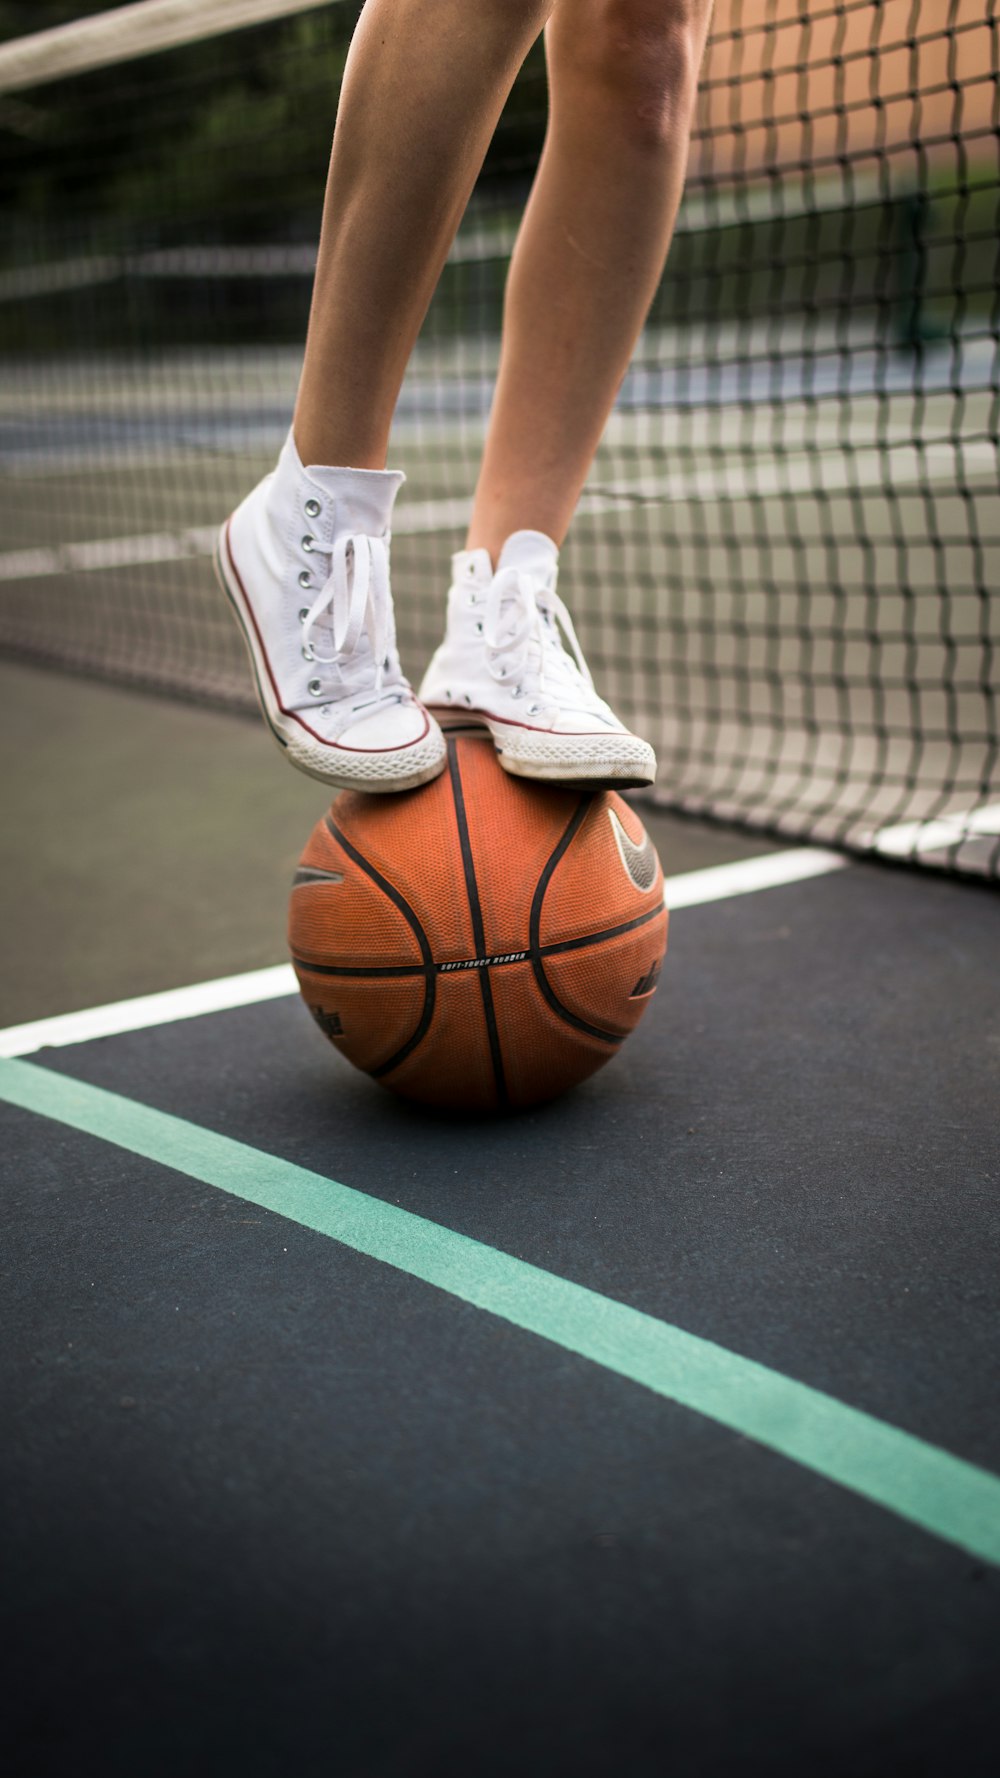 person in white nike athletic shoes standing on basketball court